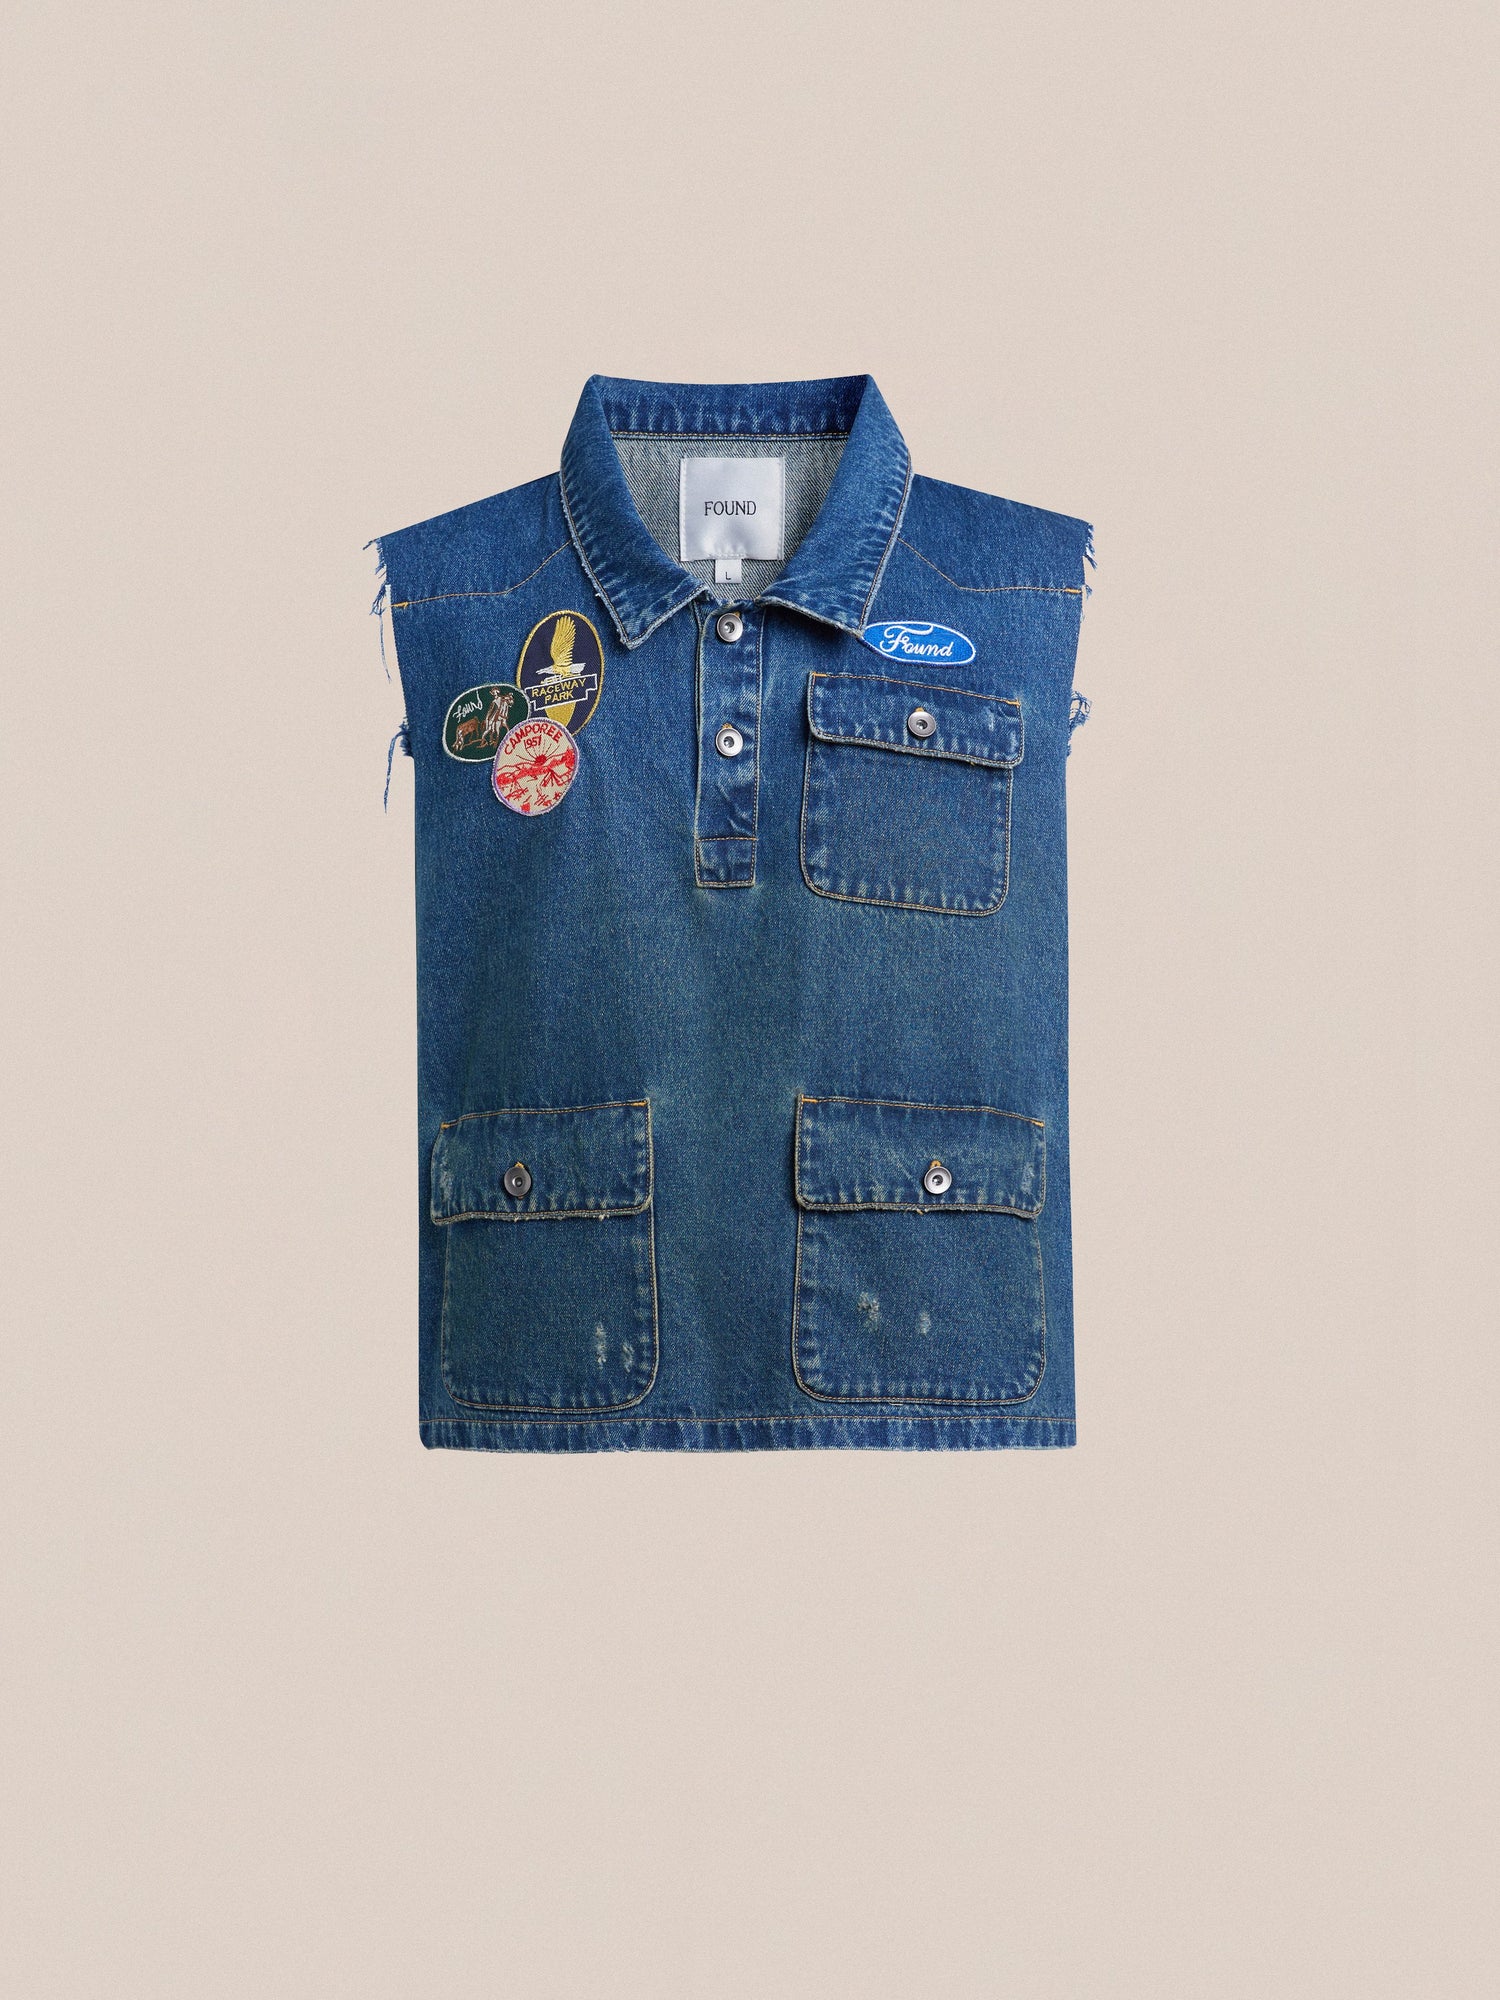 Found's Raw Cut Patch Mechanic Denim Vest, displayed flat against a beige background, featuring a front button closure and chest pockets.